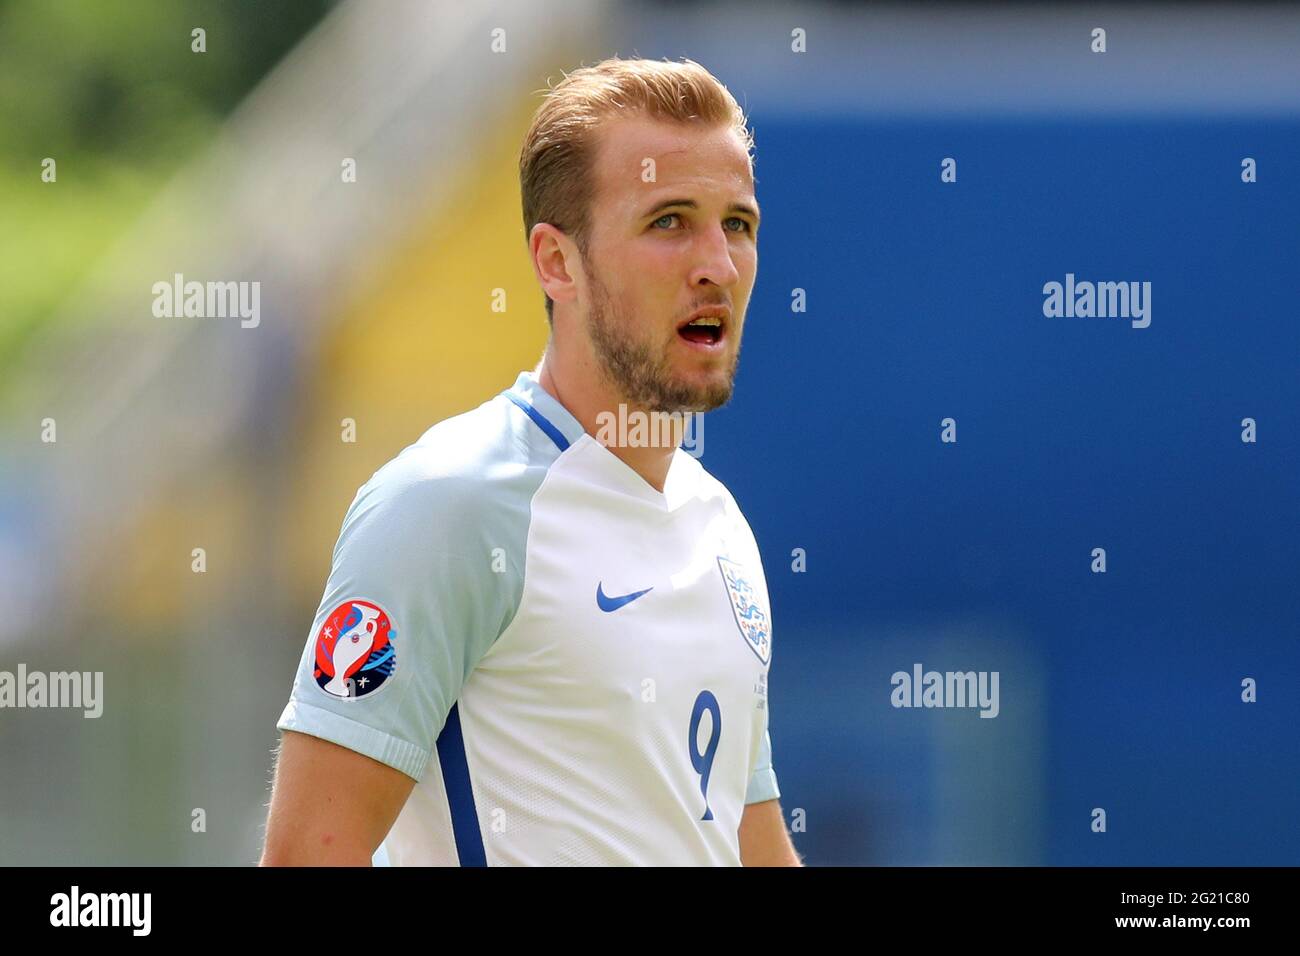 Harry Kane Of England Looks On England V Wales Uefa Euro 16 Group Match At The Stade Bollaert Delelis In Lens France June 16 Editorial Use On Stock Photo Alamy